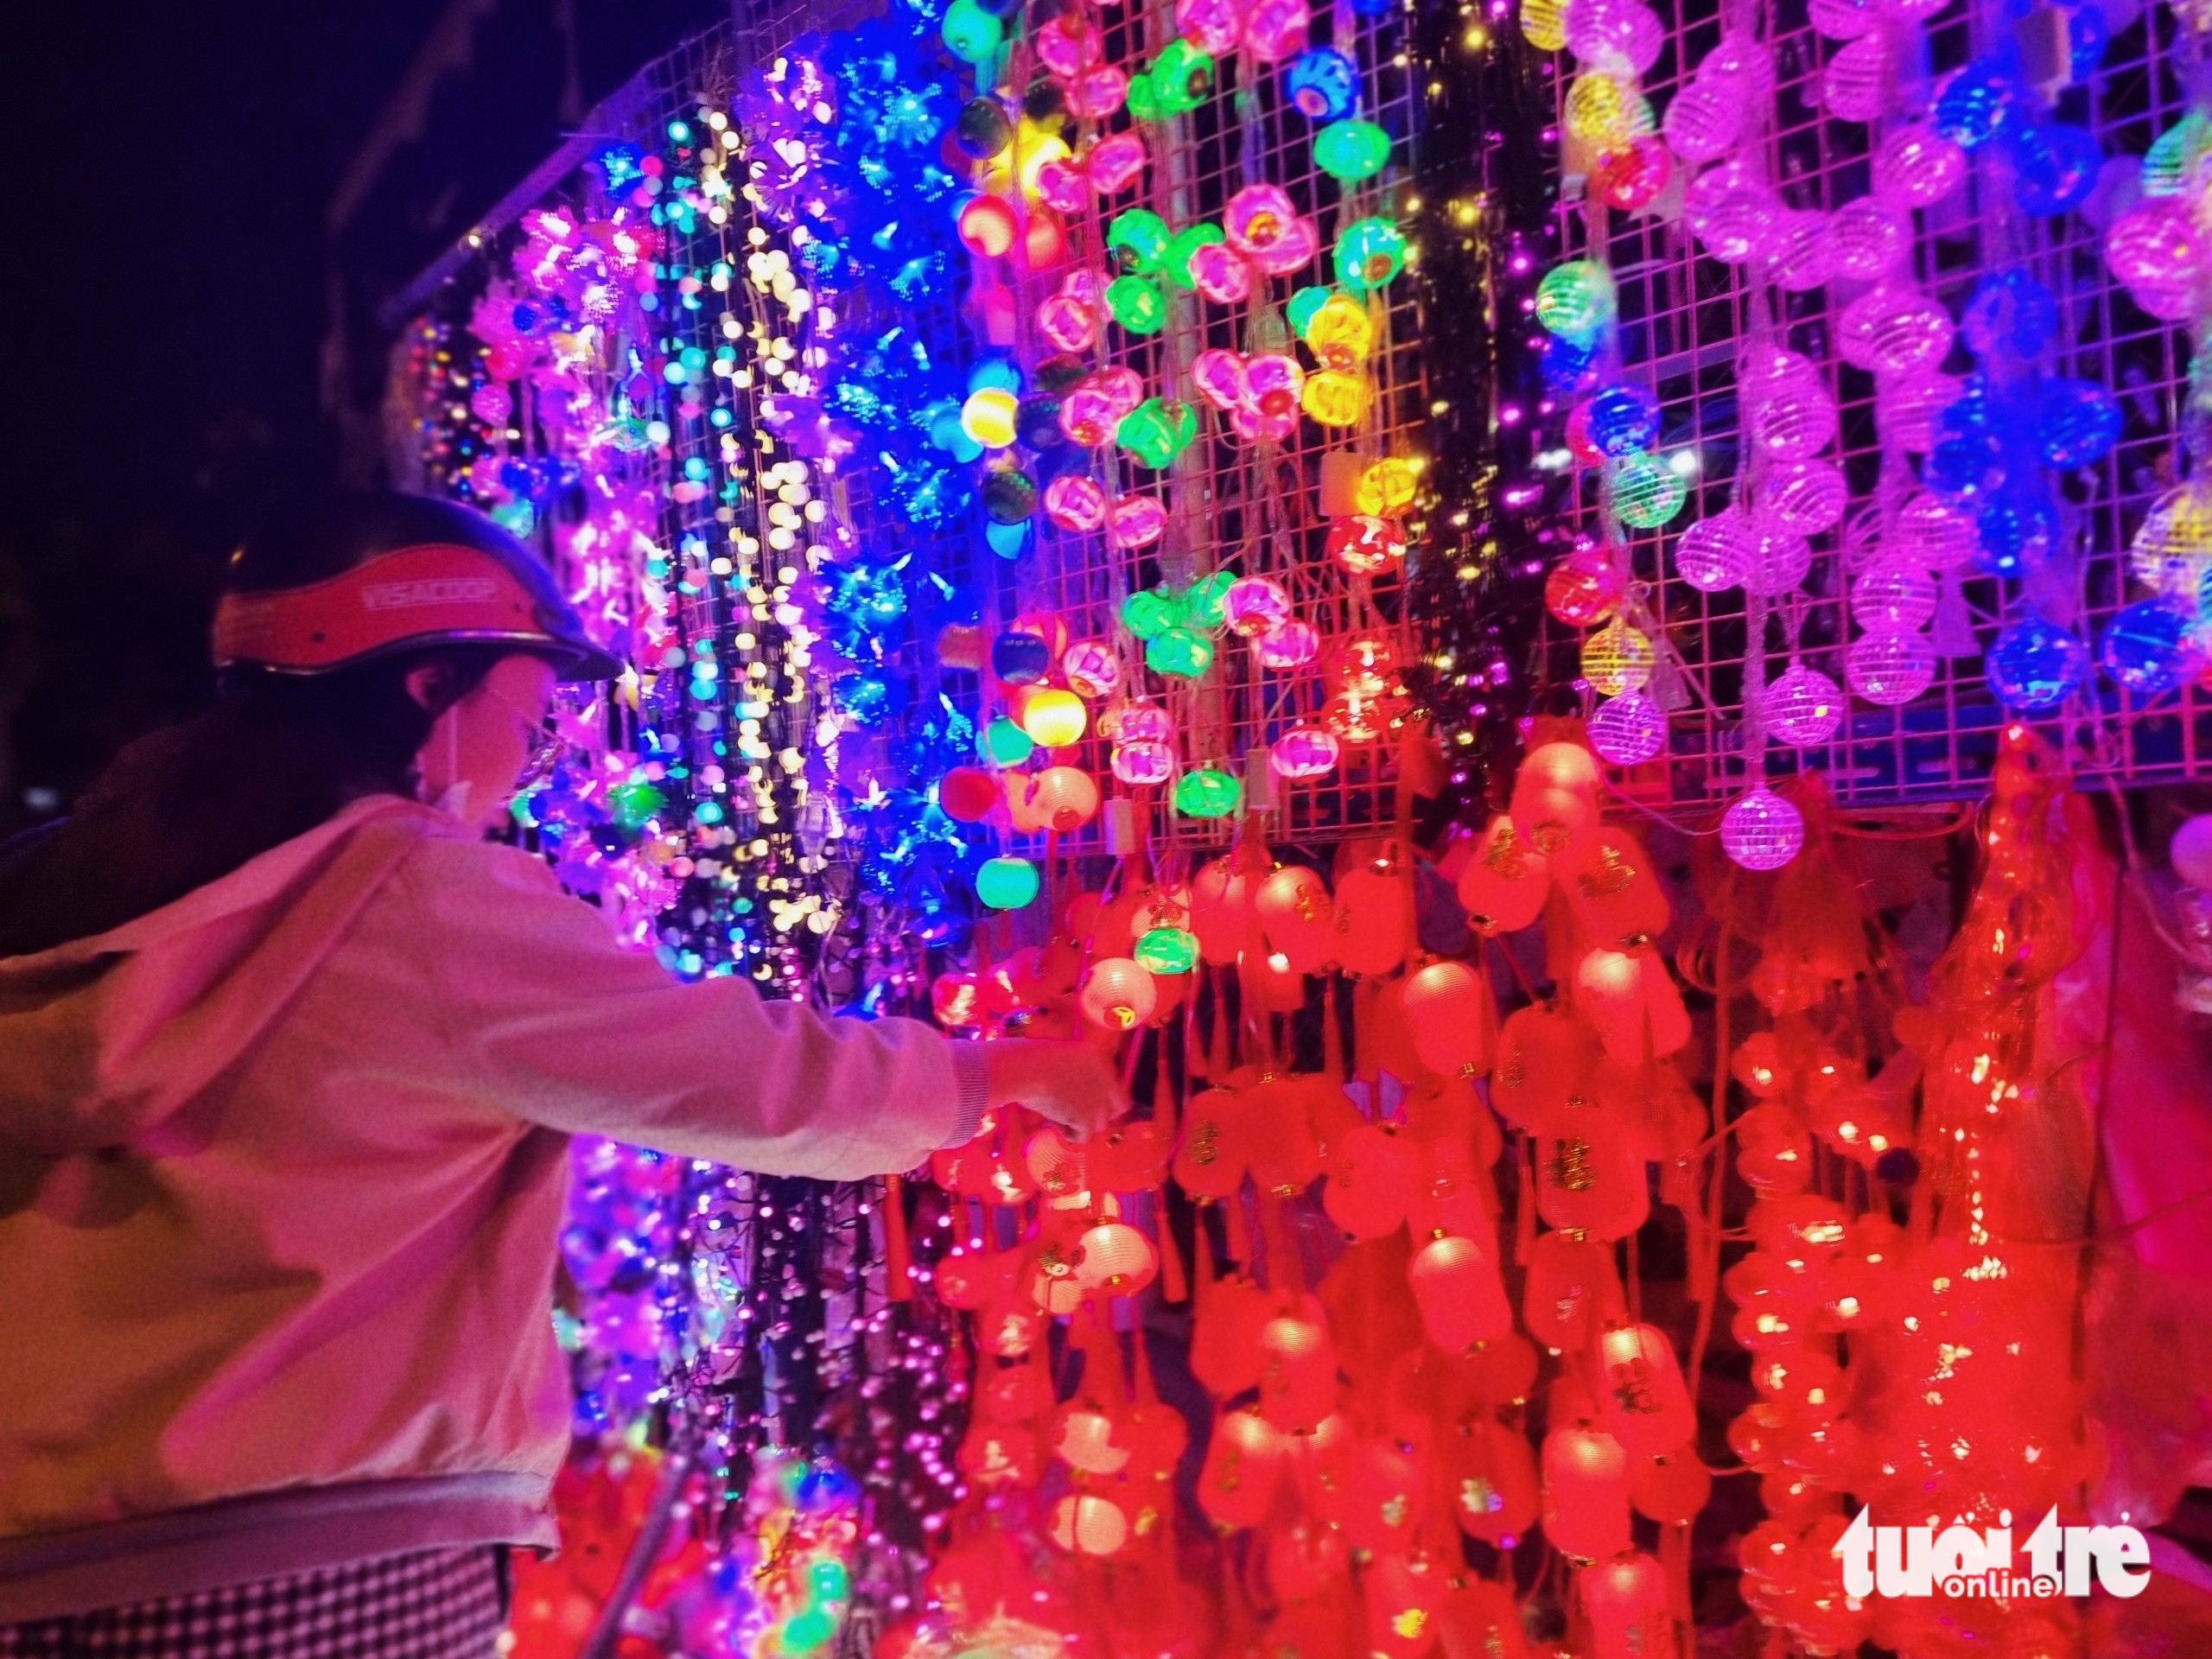 A woman shops for decorative lights at a store on Hai Thuong Lan Ong Street in District 5, Ho Chi Minh City. Photo: Nhat Xuan / Tuoi Tre